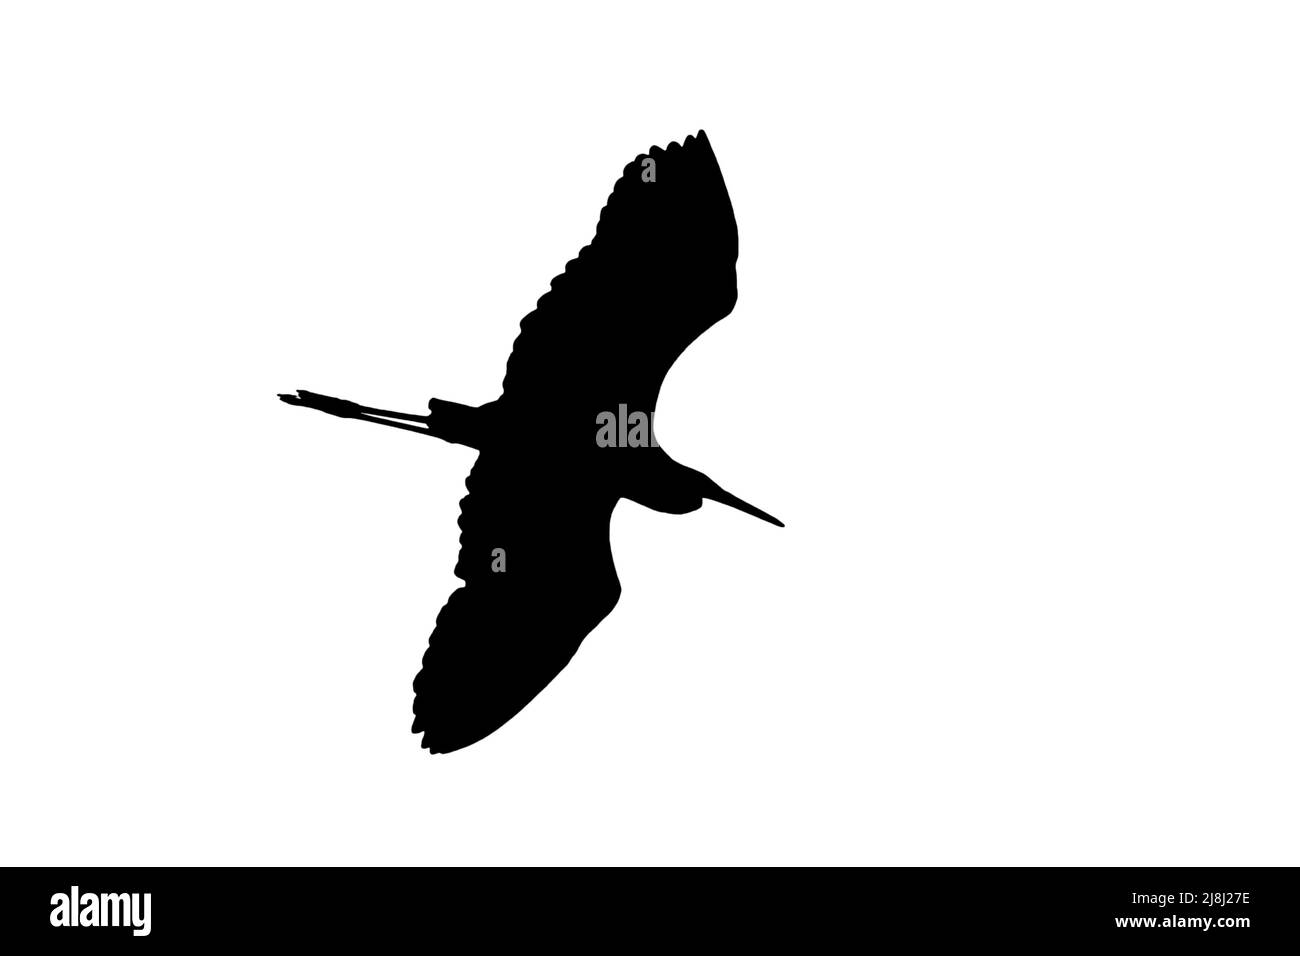 Silhouette of great white egret / common egret (Ardea alba) in flight outlined against white background to show wings, head and tail shapes Stock Photo